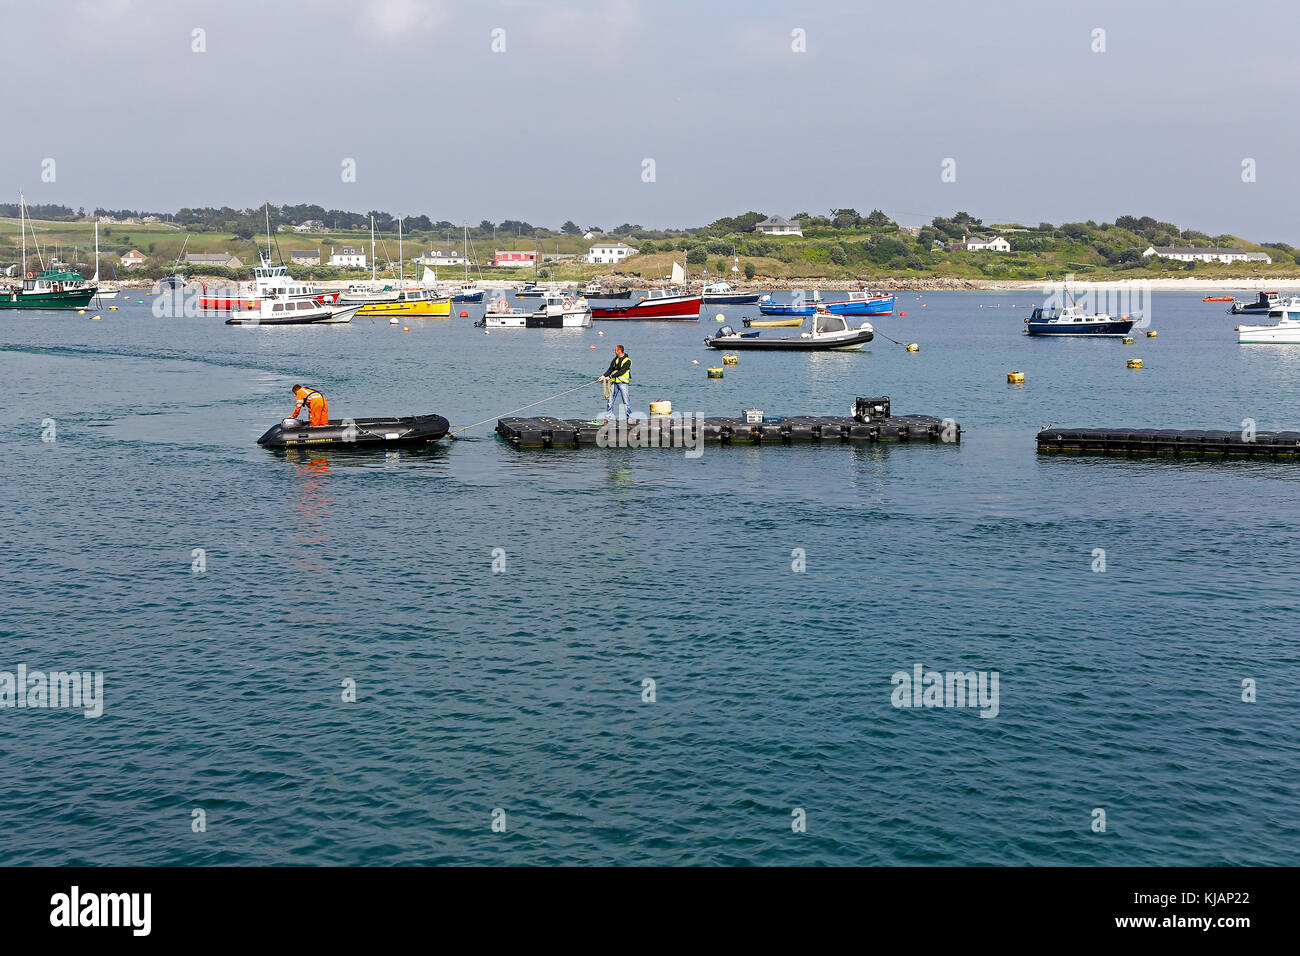 A mobile or portable or movable harbour in St. Mary's harbour, St. Mary's, Isles of Scilly, Cornwall, England, UK Stock Photo